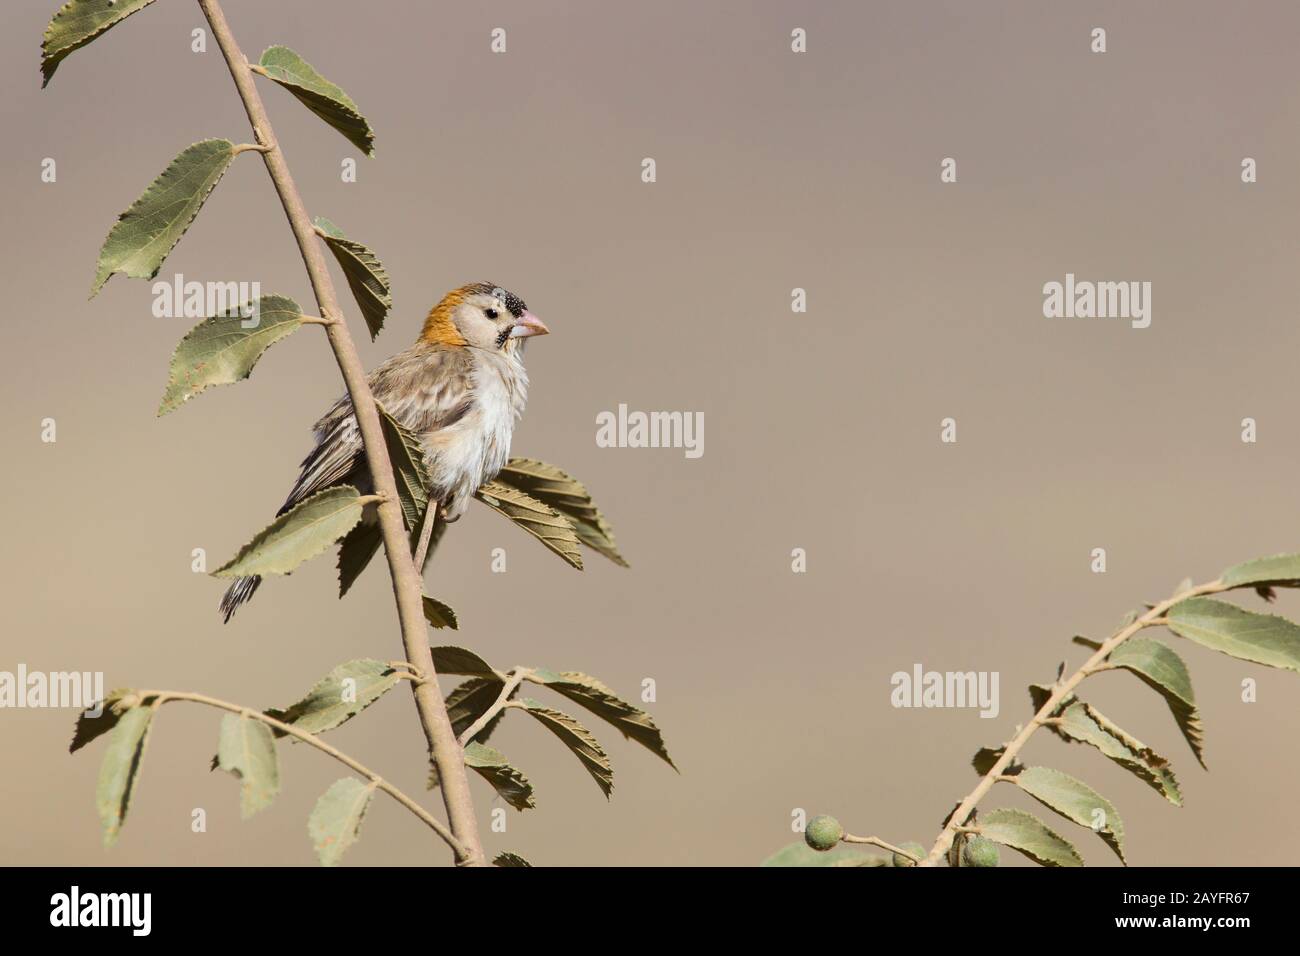 Speckle-fronted weaver Sporopipes frontalis, adult, perched on branch, Jemma Valley, Ethiopia in February. Stock Photo